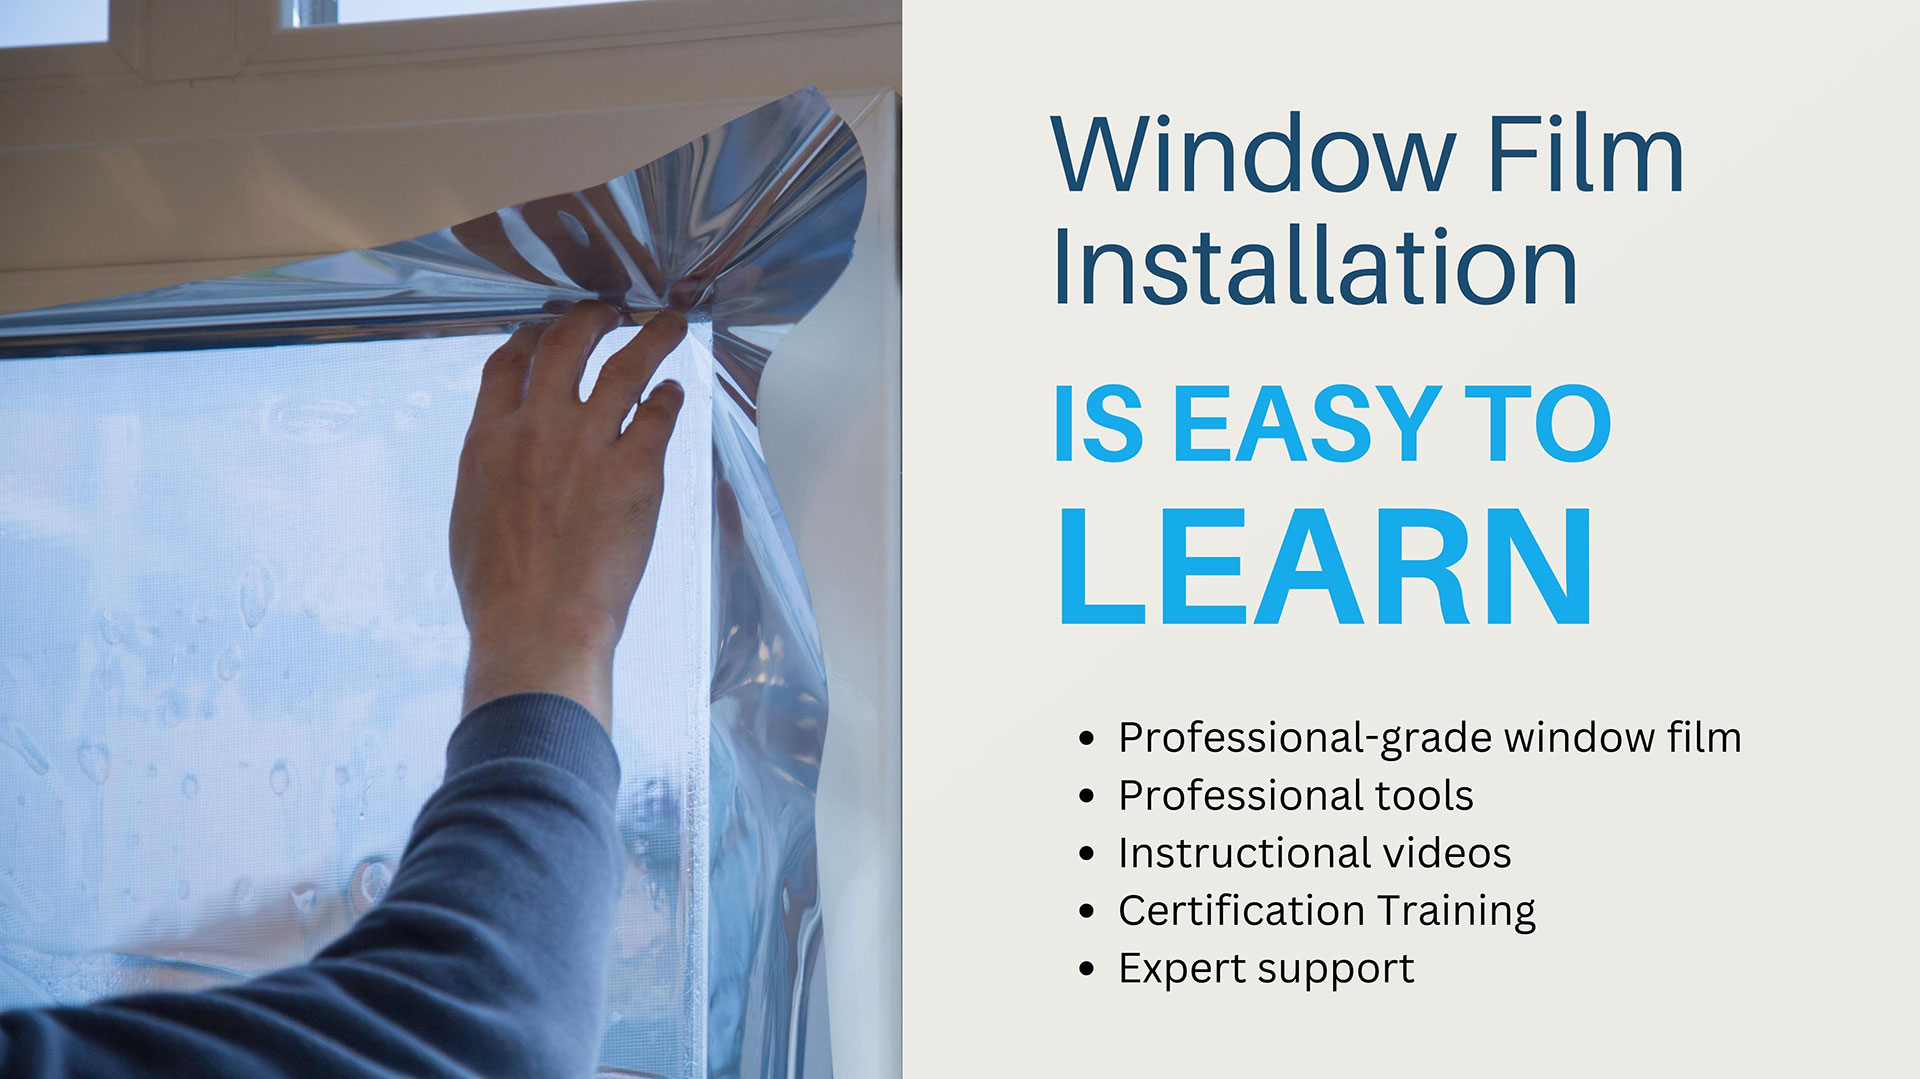 Window film installation is easy to learn! Professional-grade window film, professional tools, instructional videos, certification training, and expert support